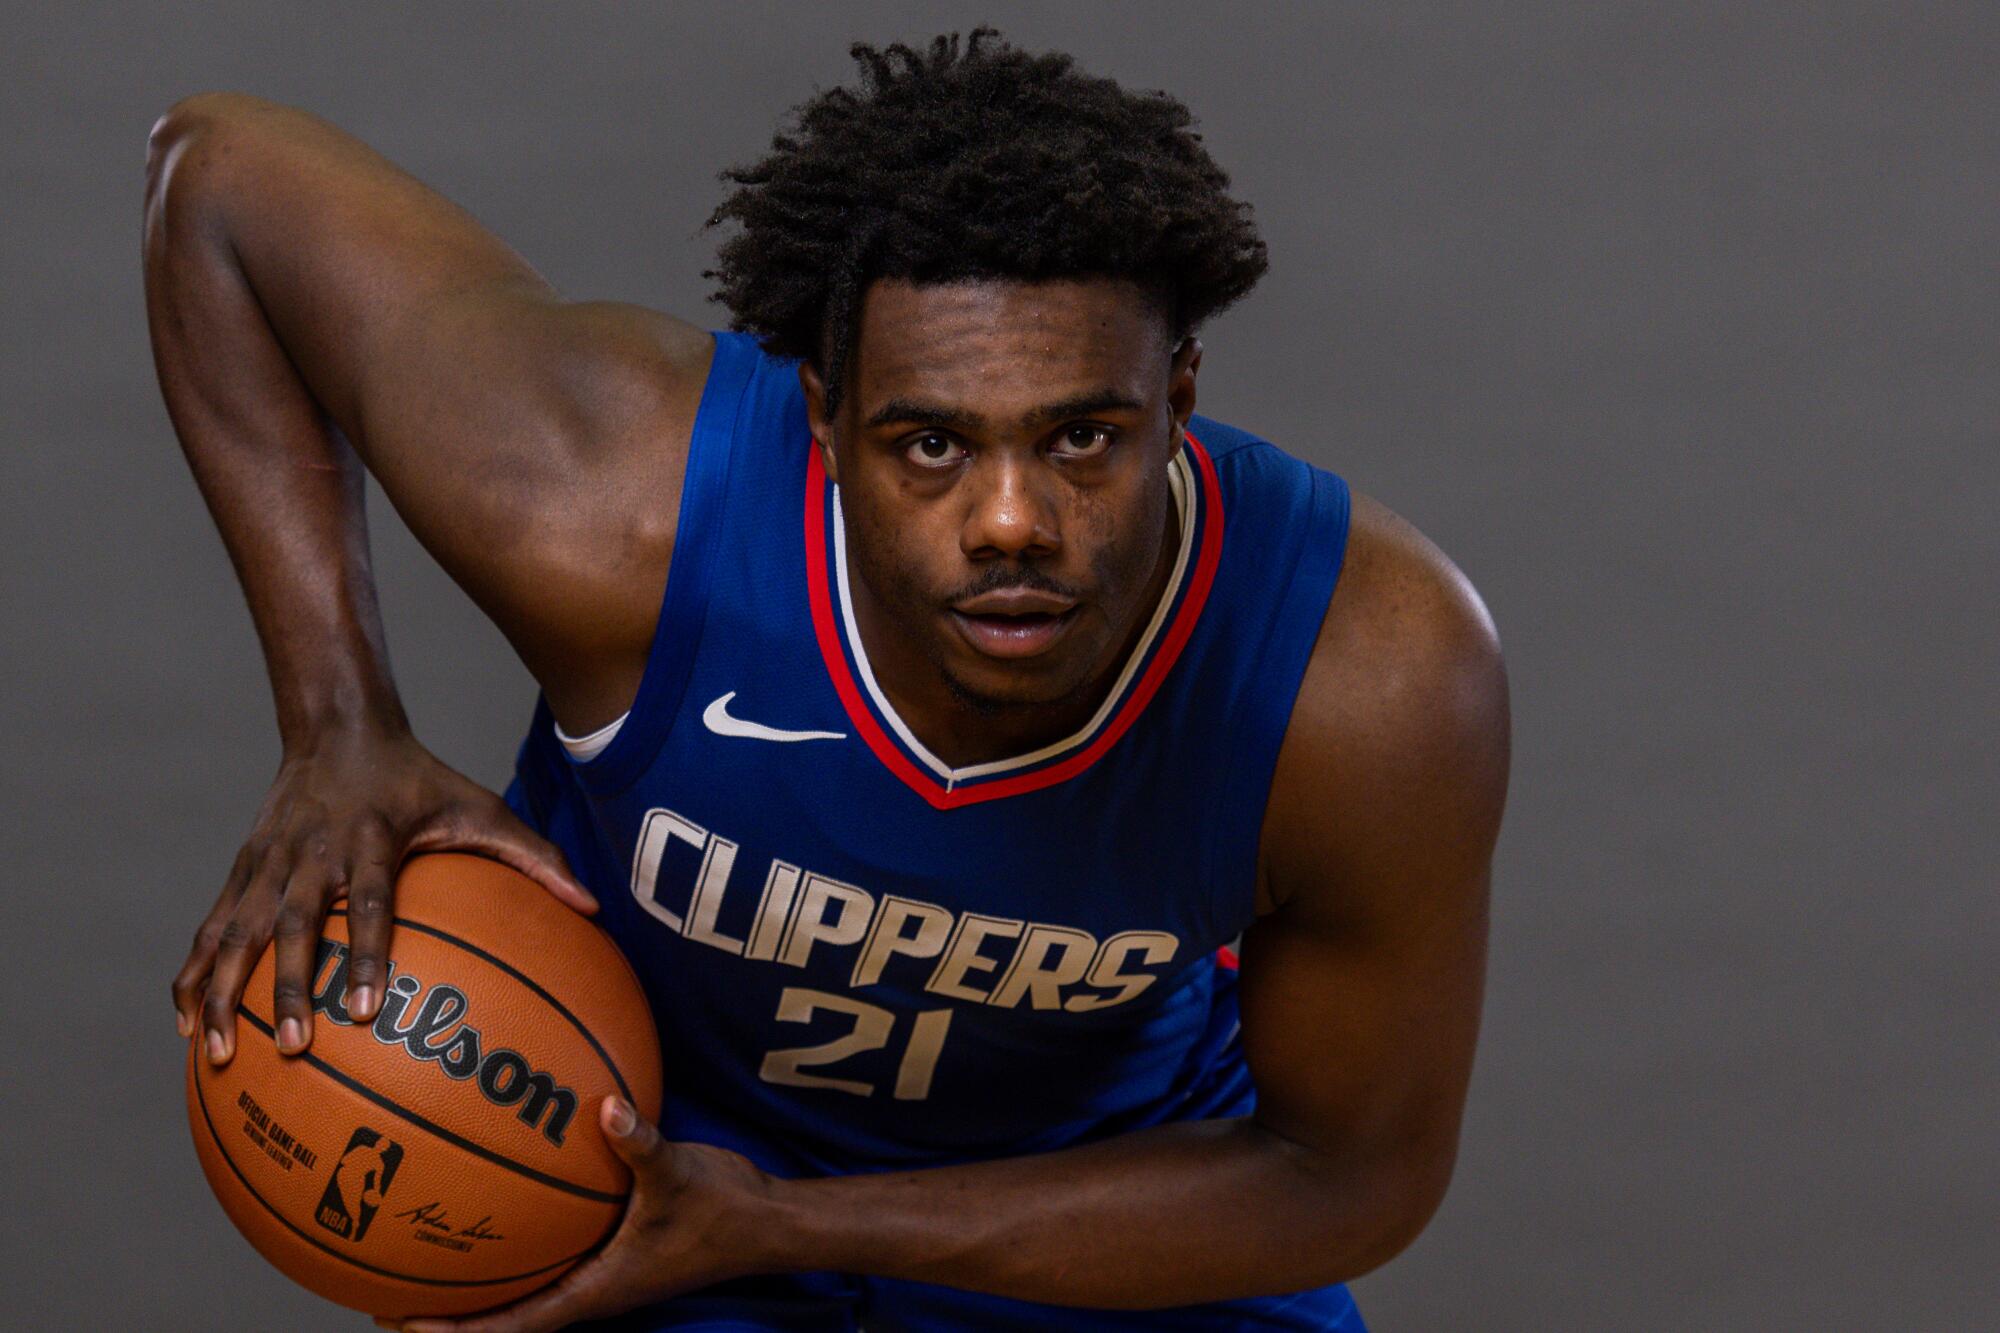 Clippers rookie forward Kobe Brown poses for a photo while holding a basketball.